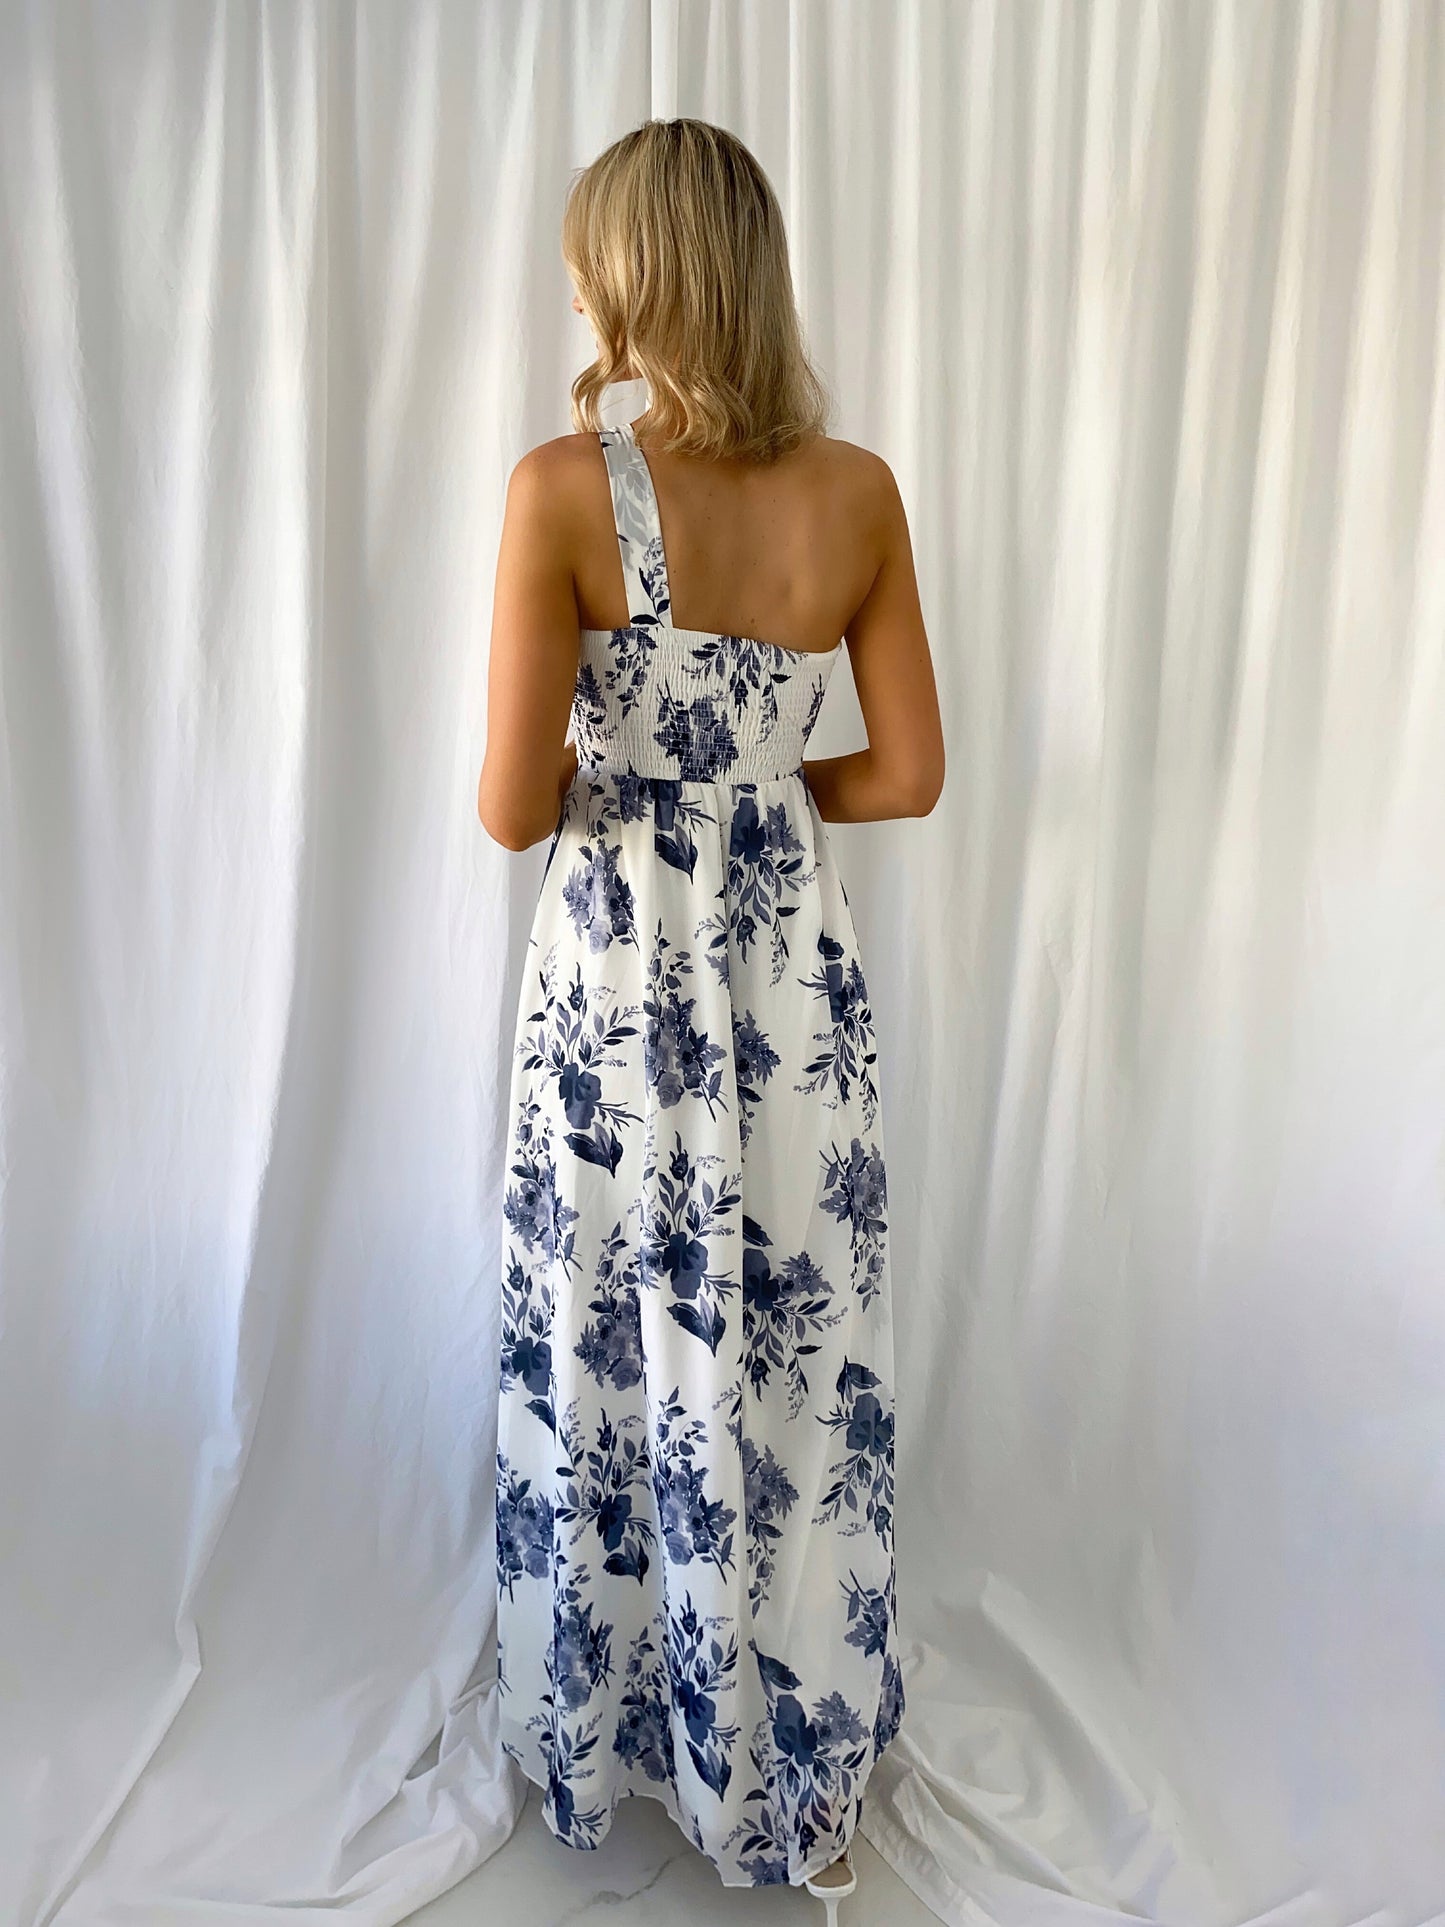 Stephanie One Shoulder Draped Top Floral Dress - Navy